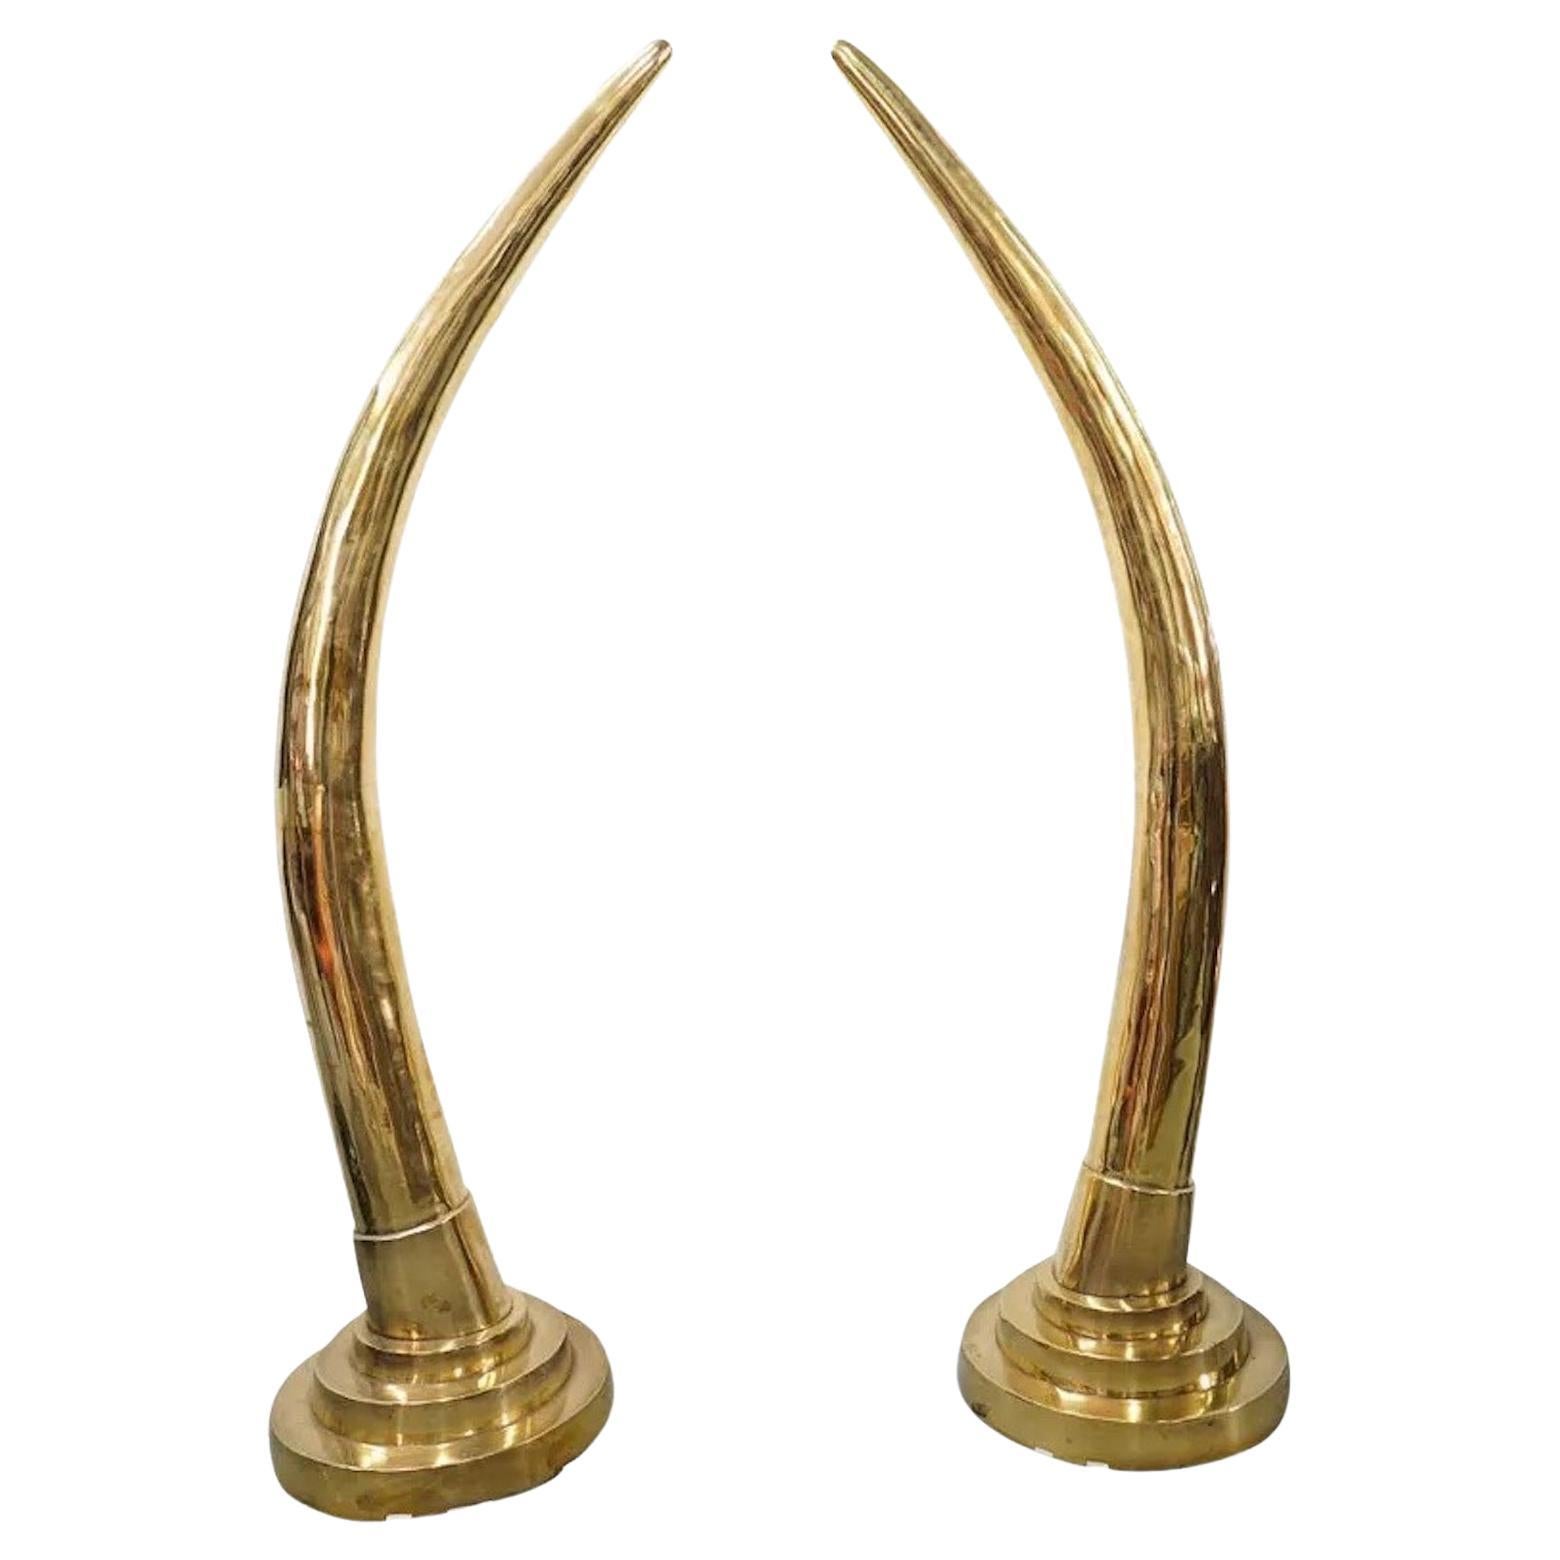 Monumental Pair of Polished Brass Faux Tusks